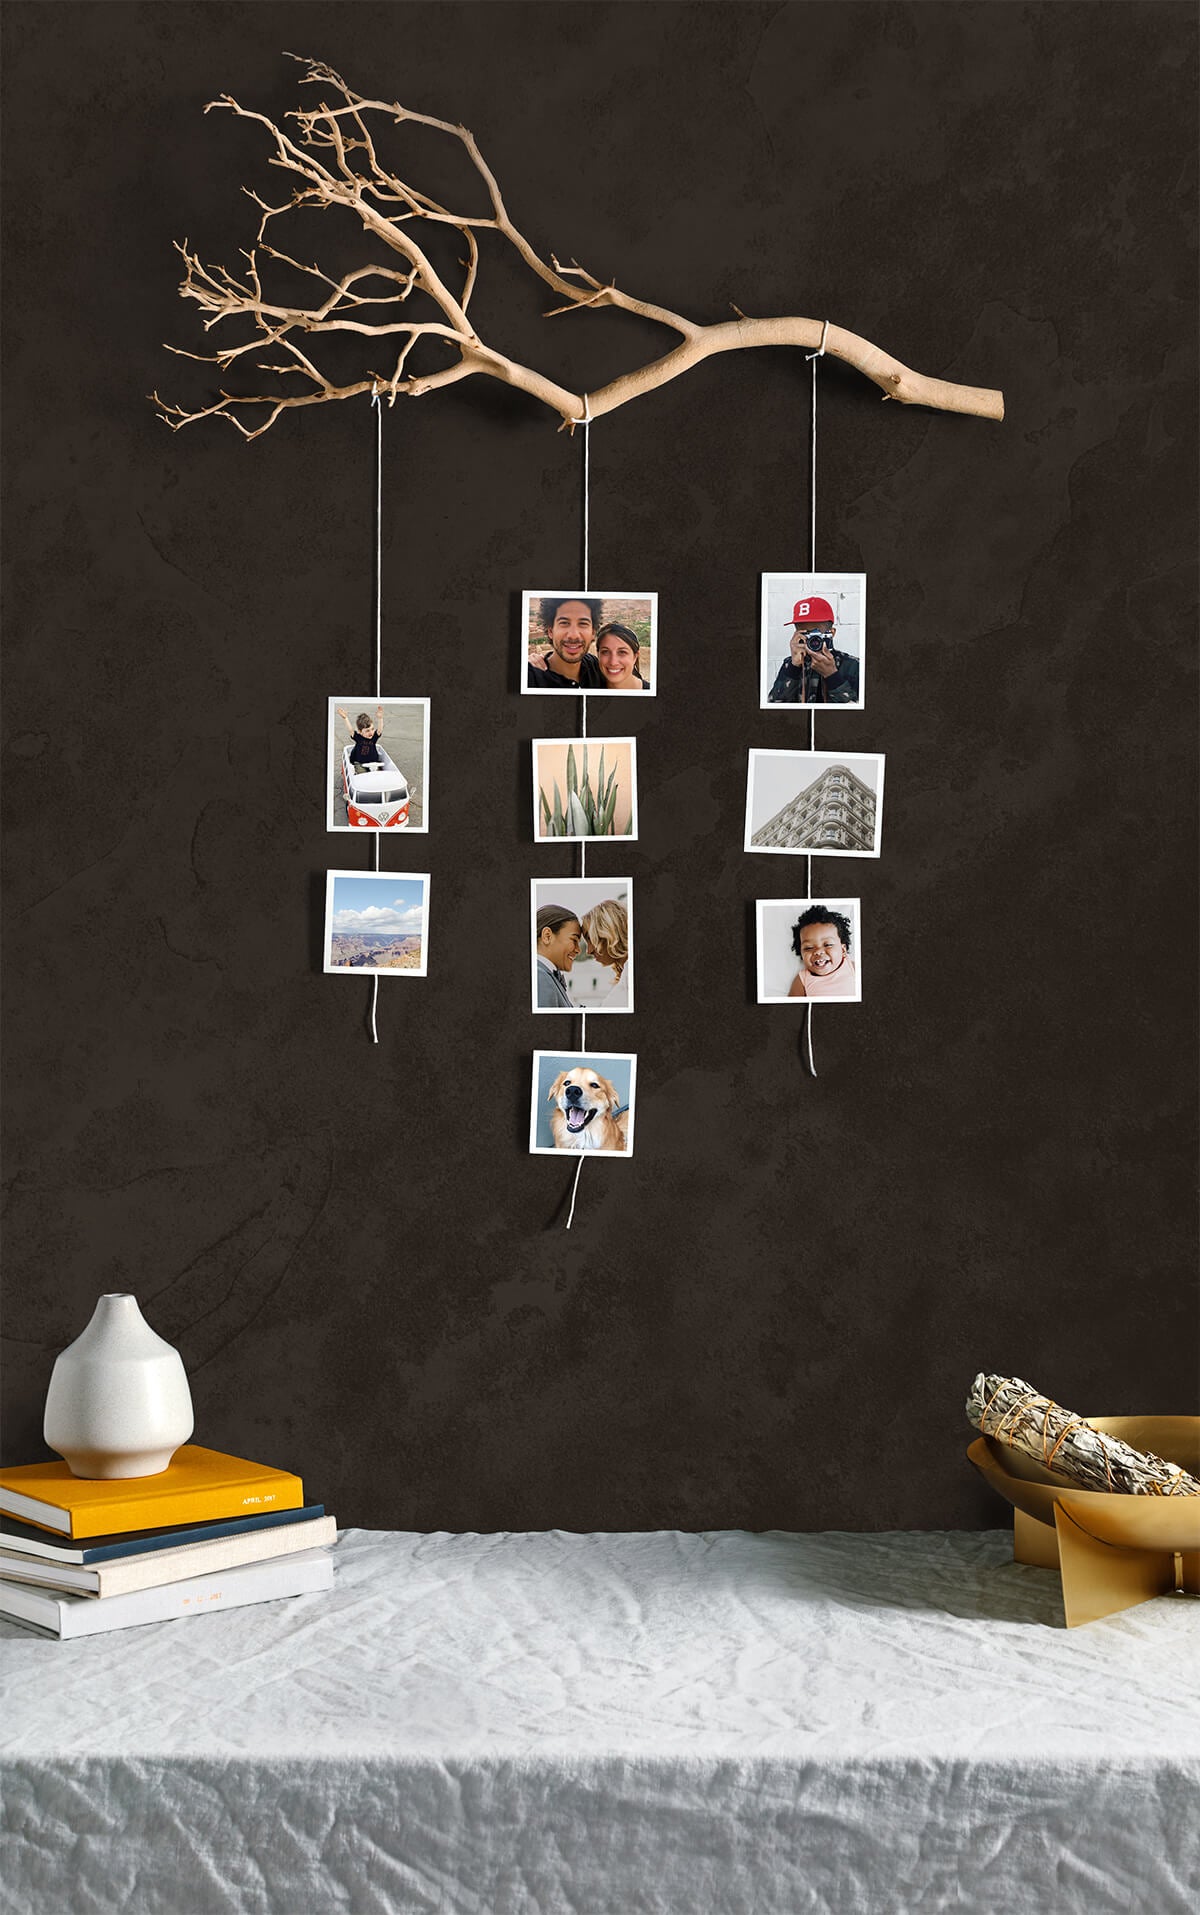 15 creative photo display ideas that don't need frames